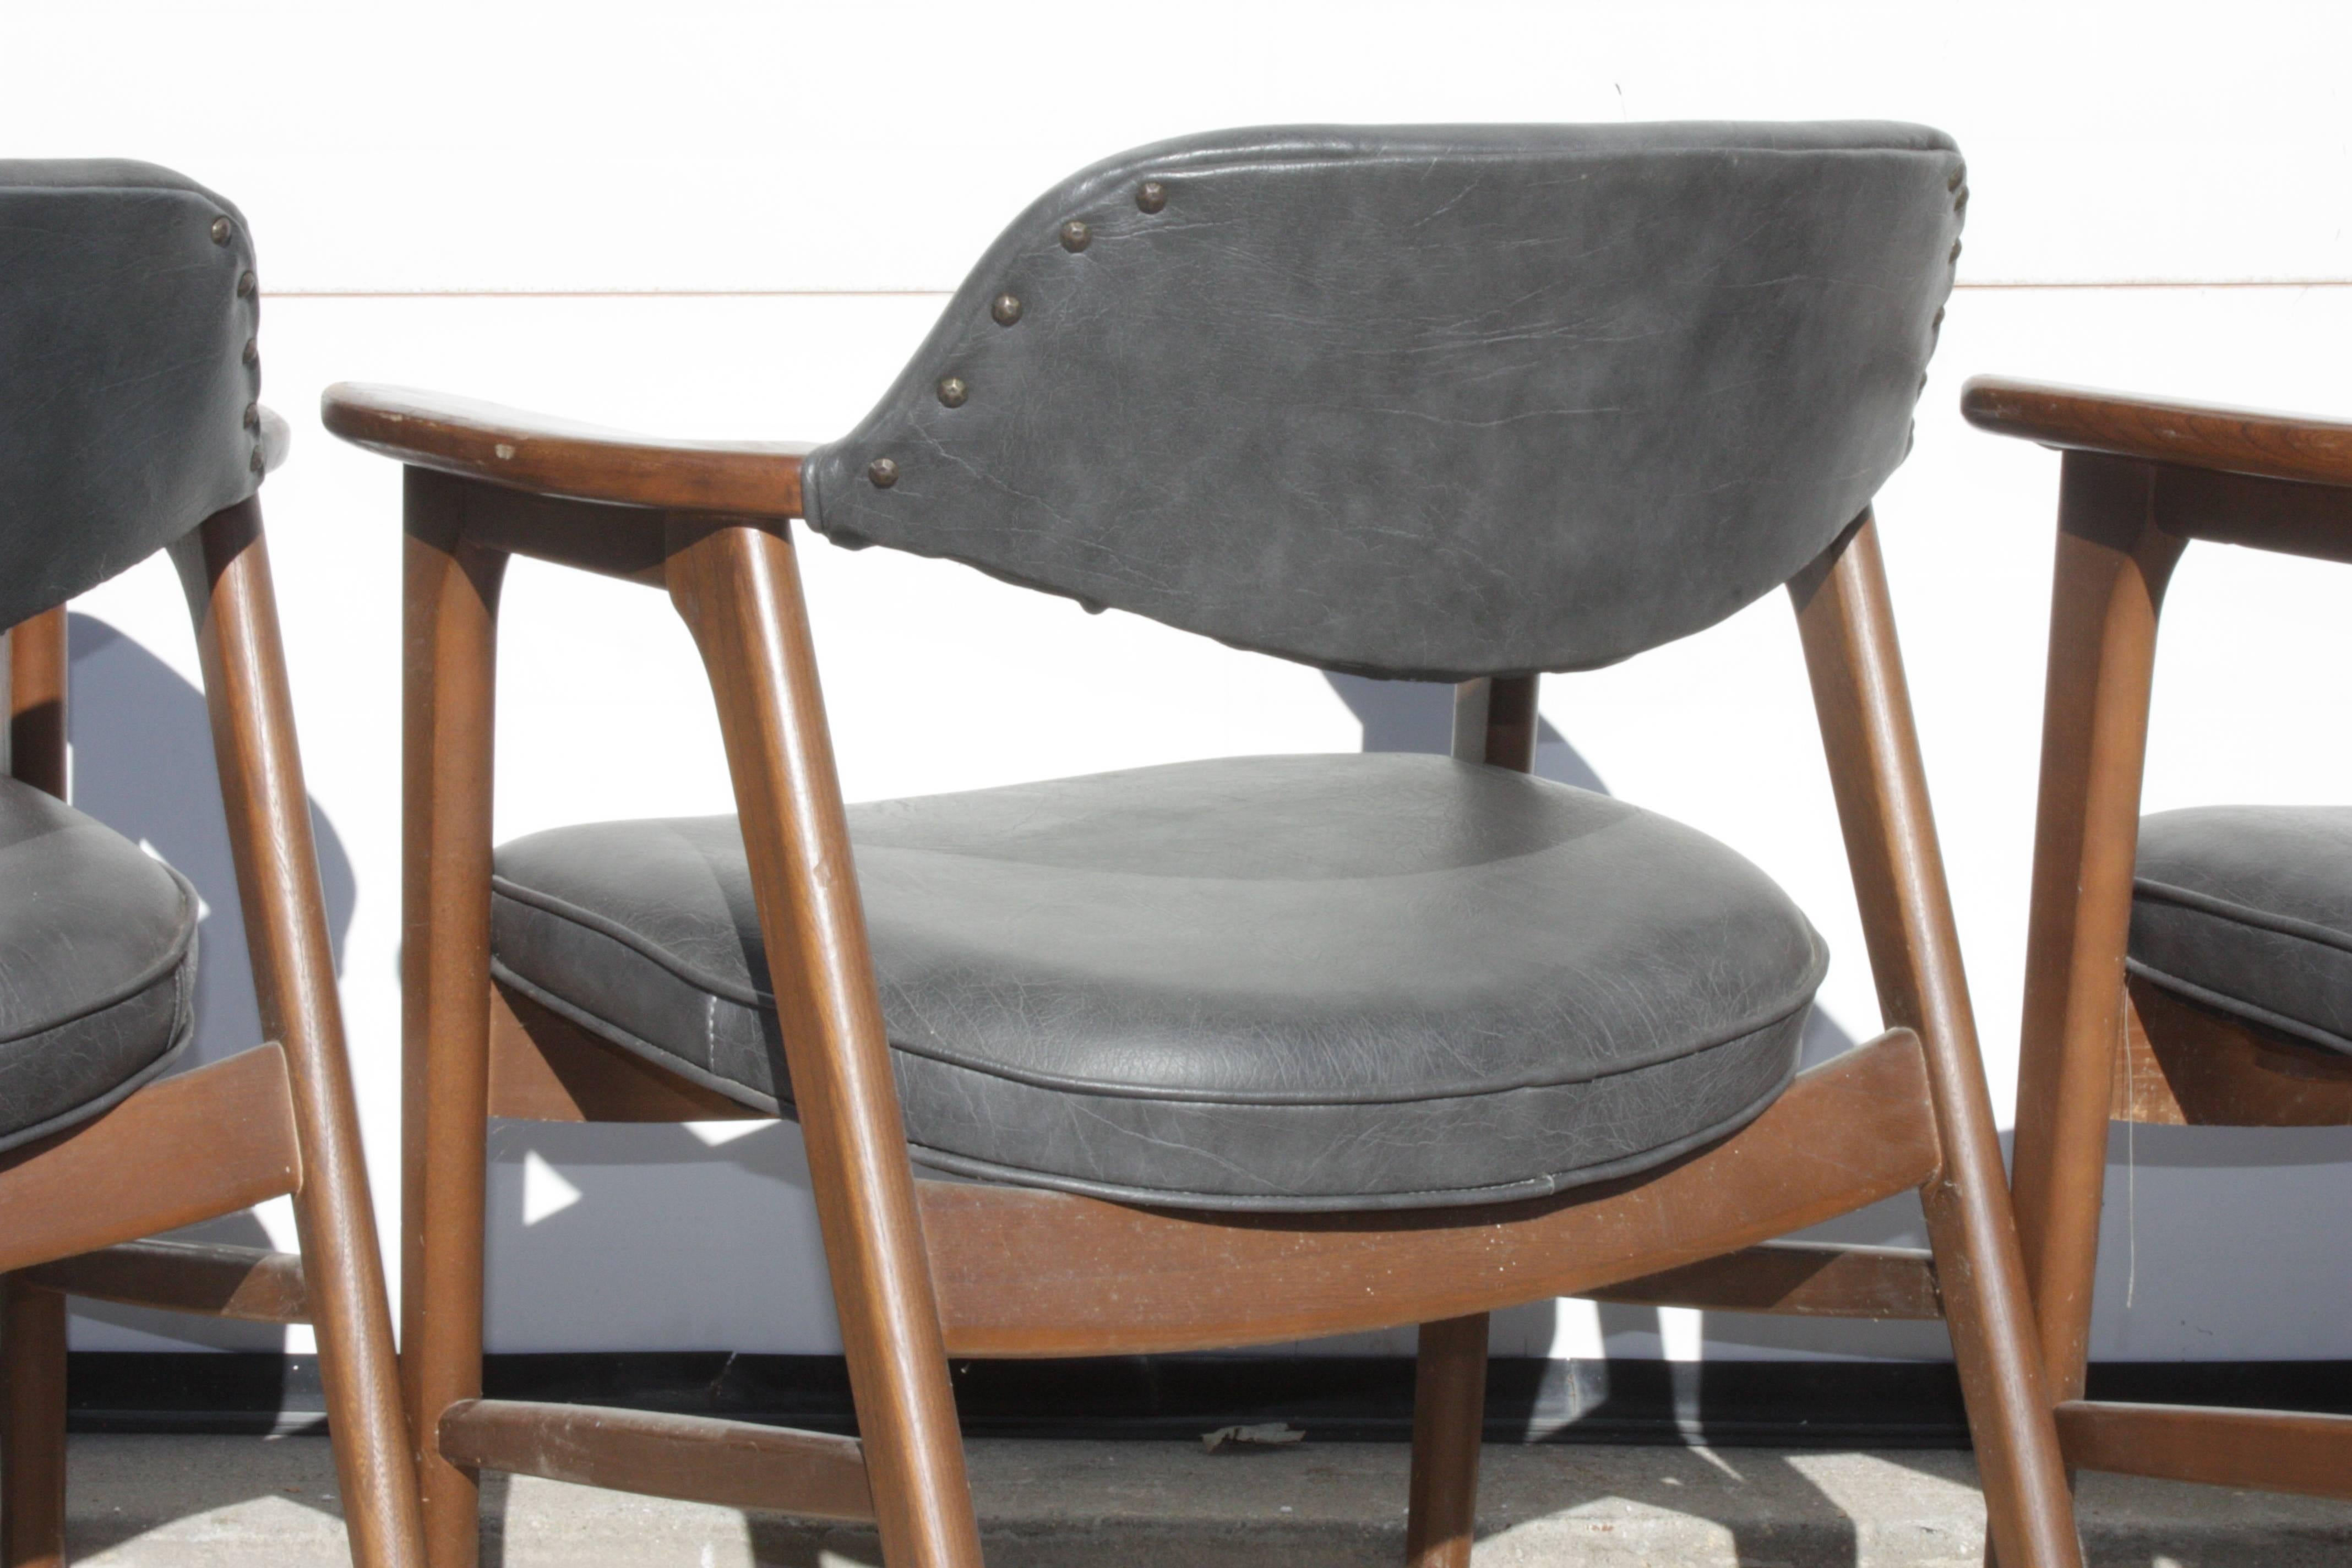 Set of 8 Swedish Mid-Century Modern Mahogany Curved Cut-Out Barrel Chairs In Excellent Condition For Sale In Southampton, NY